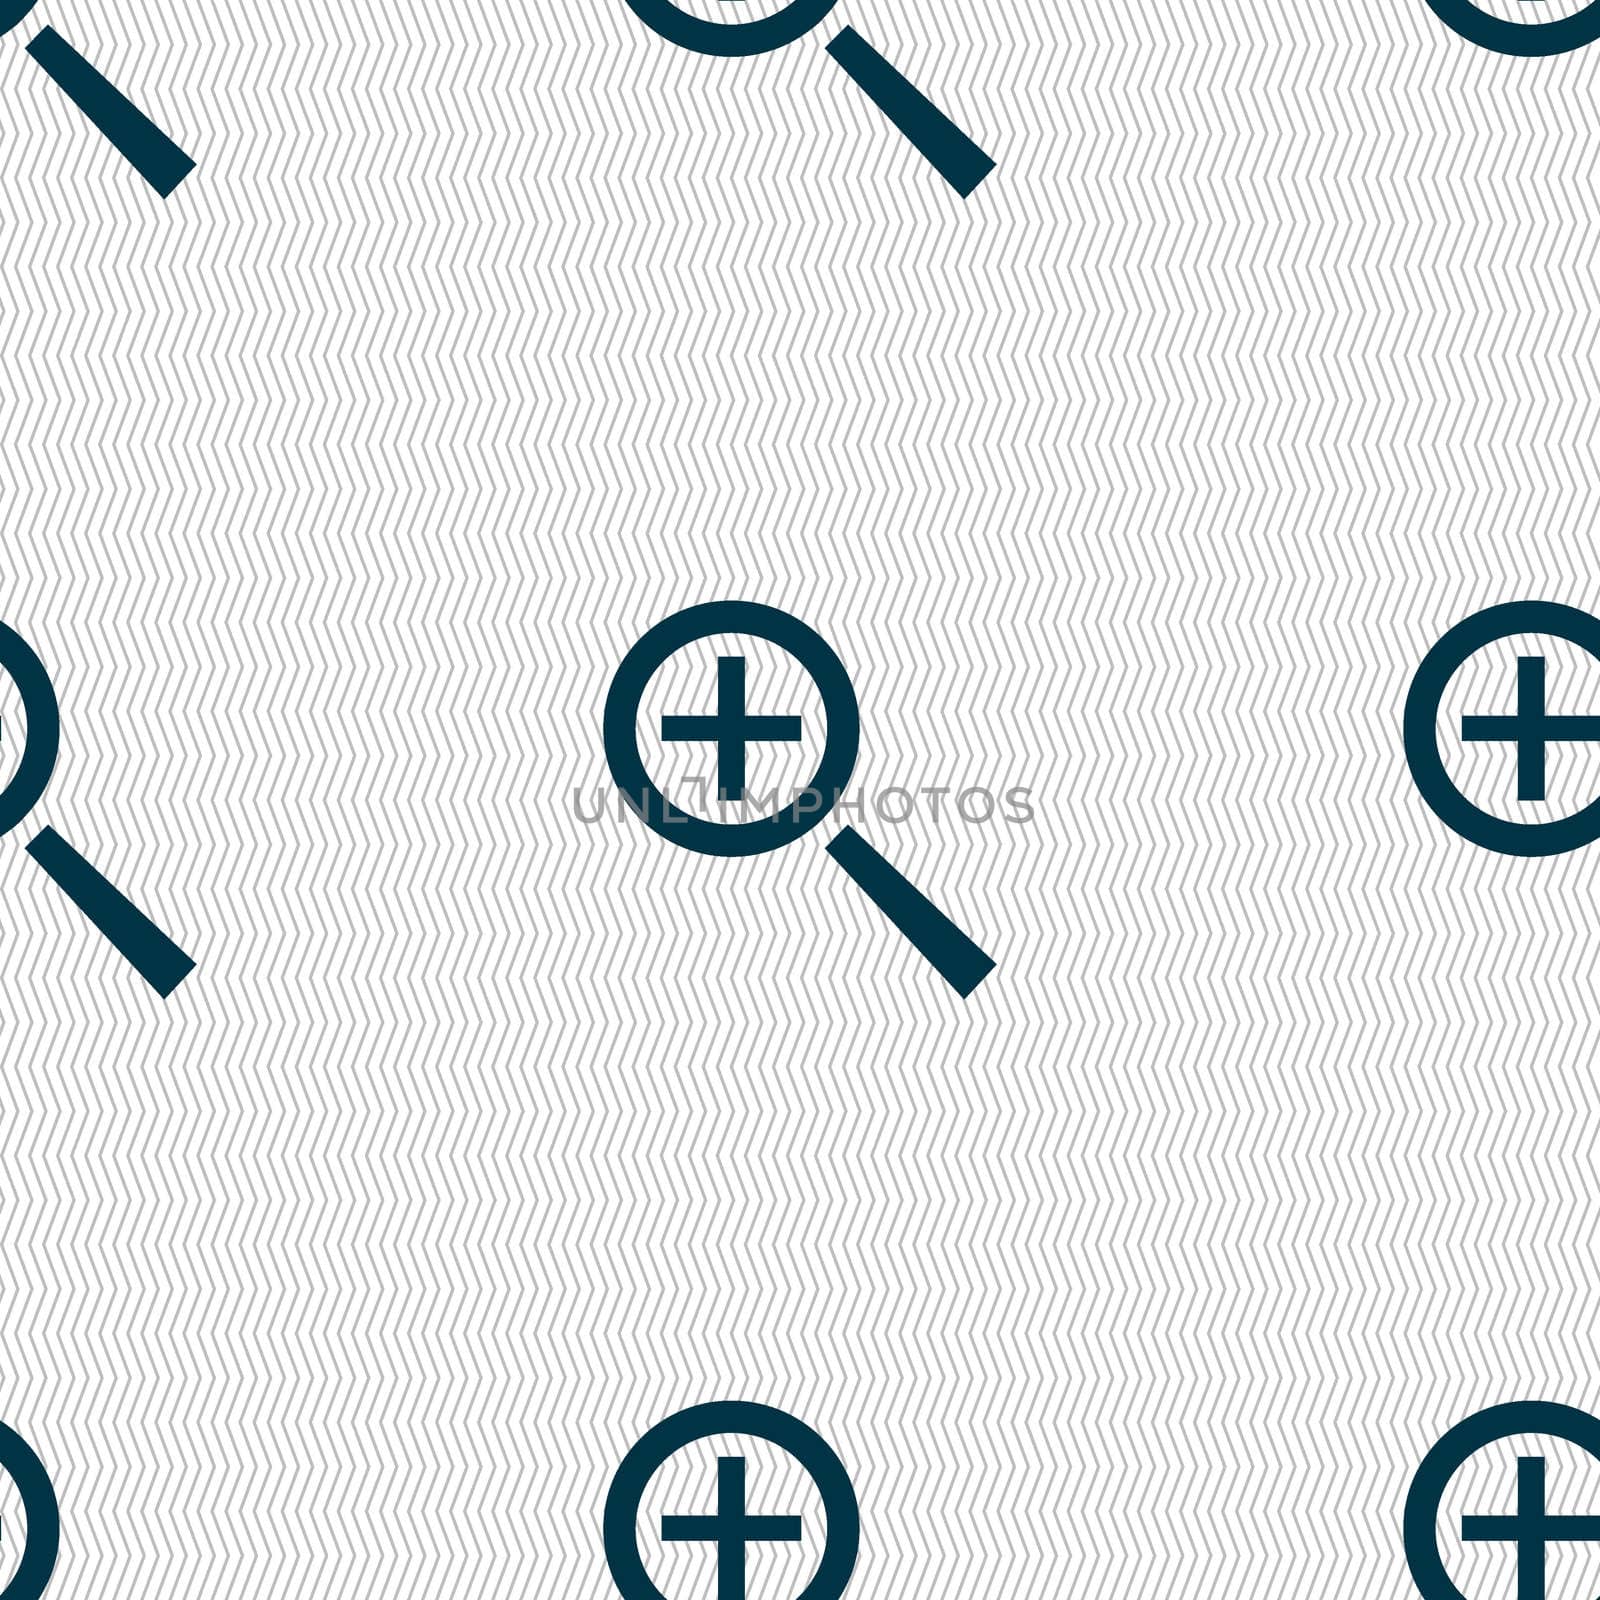 Magnifier glass, Zoom tool icon sign. Seamless abstract background with geometric shapes. illustration